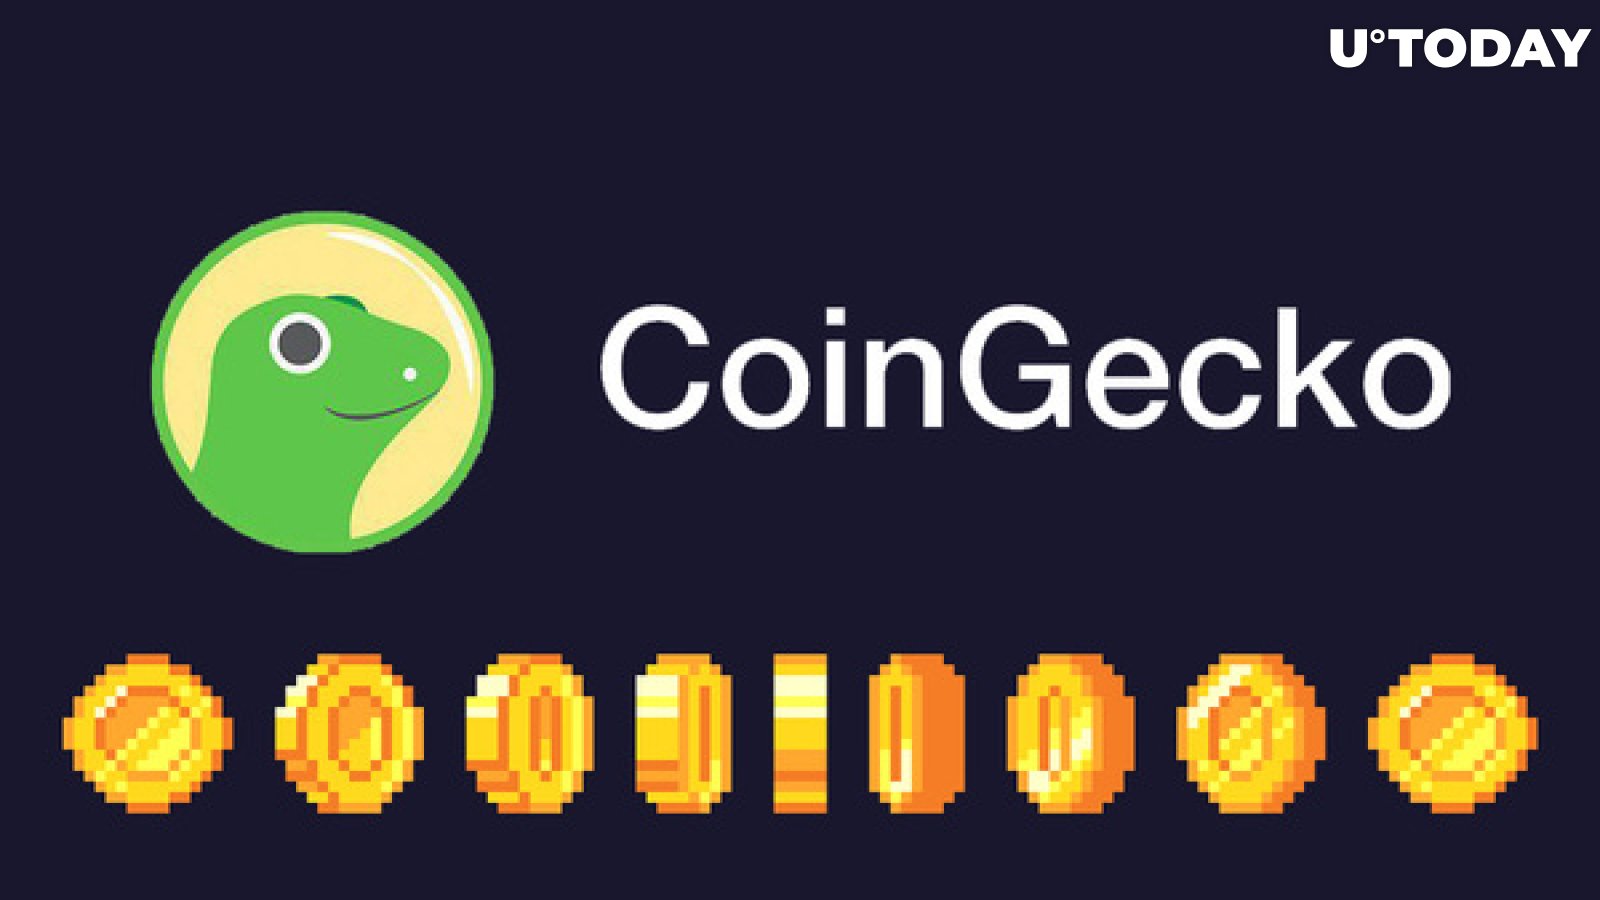 New Trend? 9 of the 15 Most Popular Coins on CoinGecko Turned Up as Gaming Coins